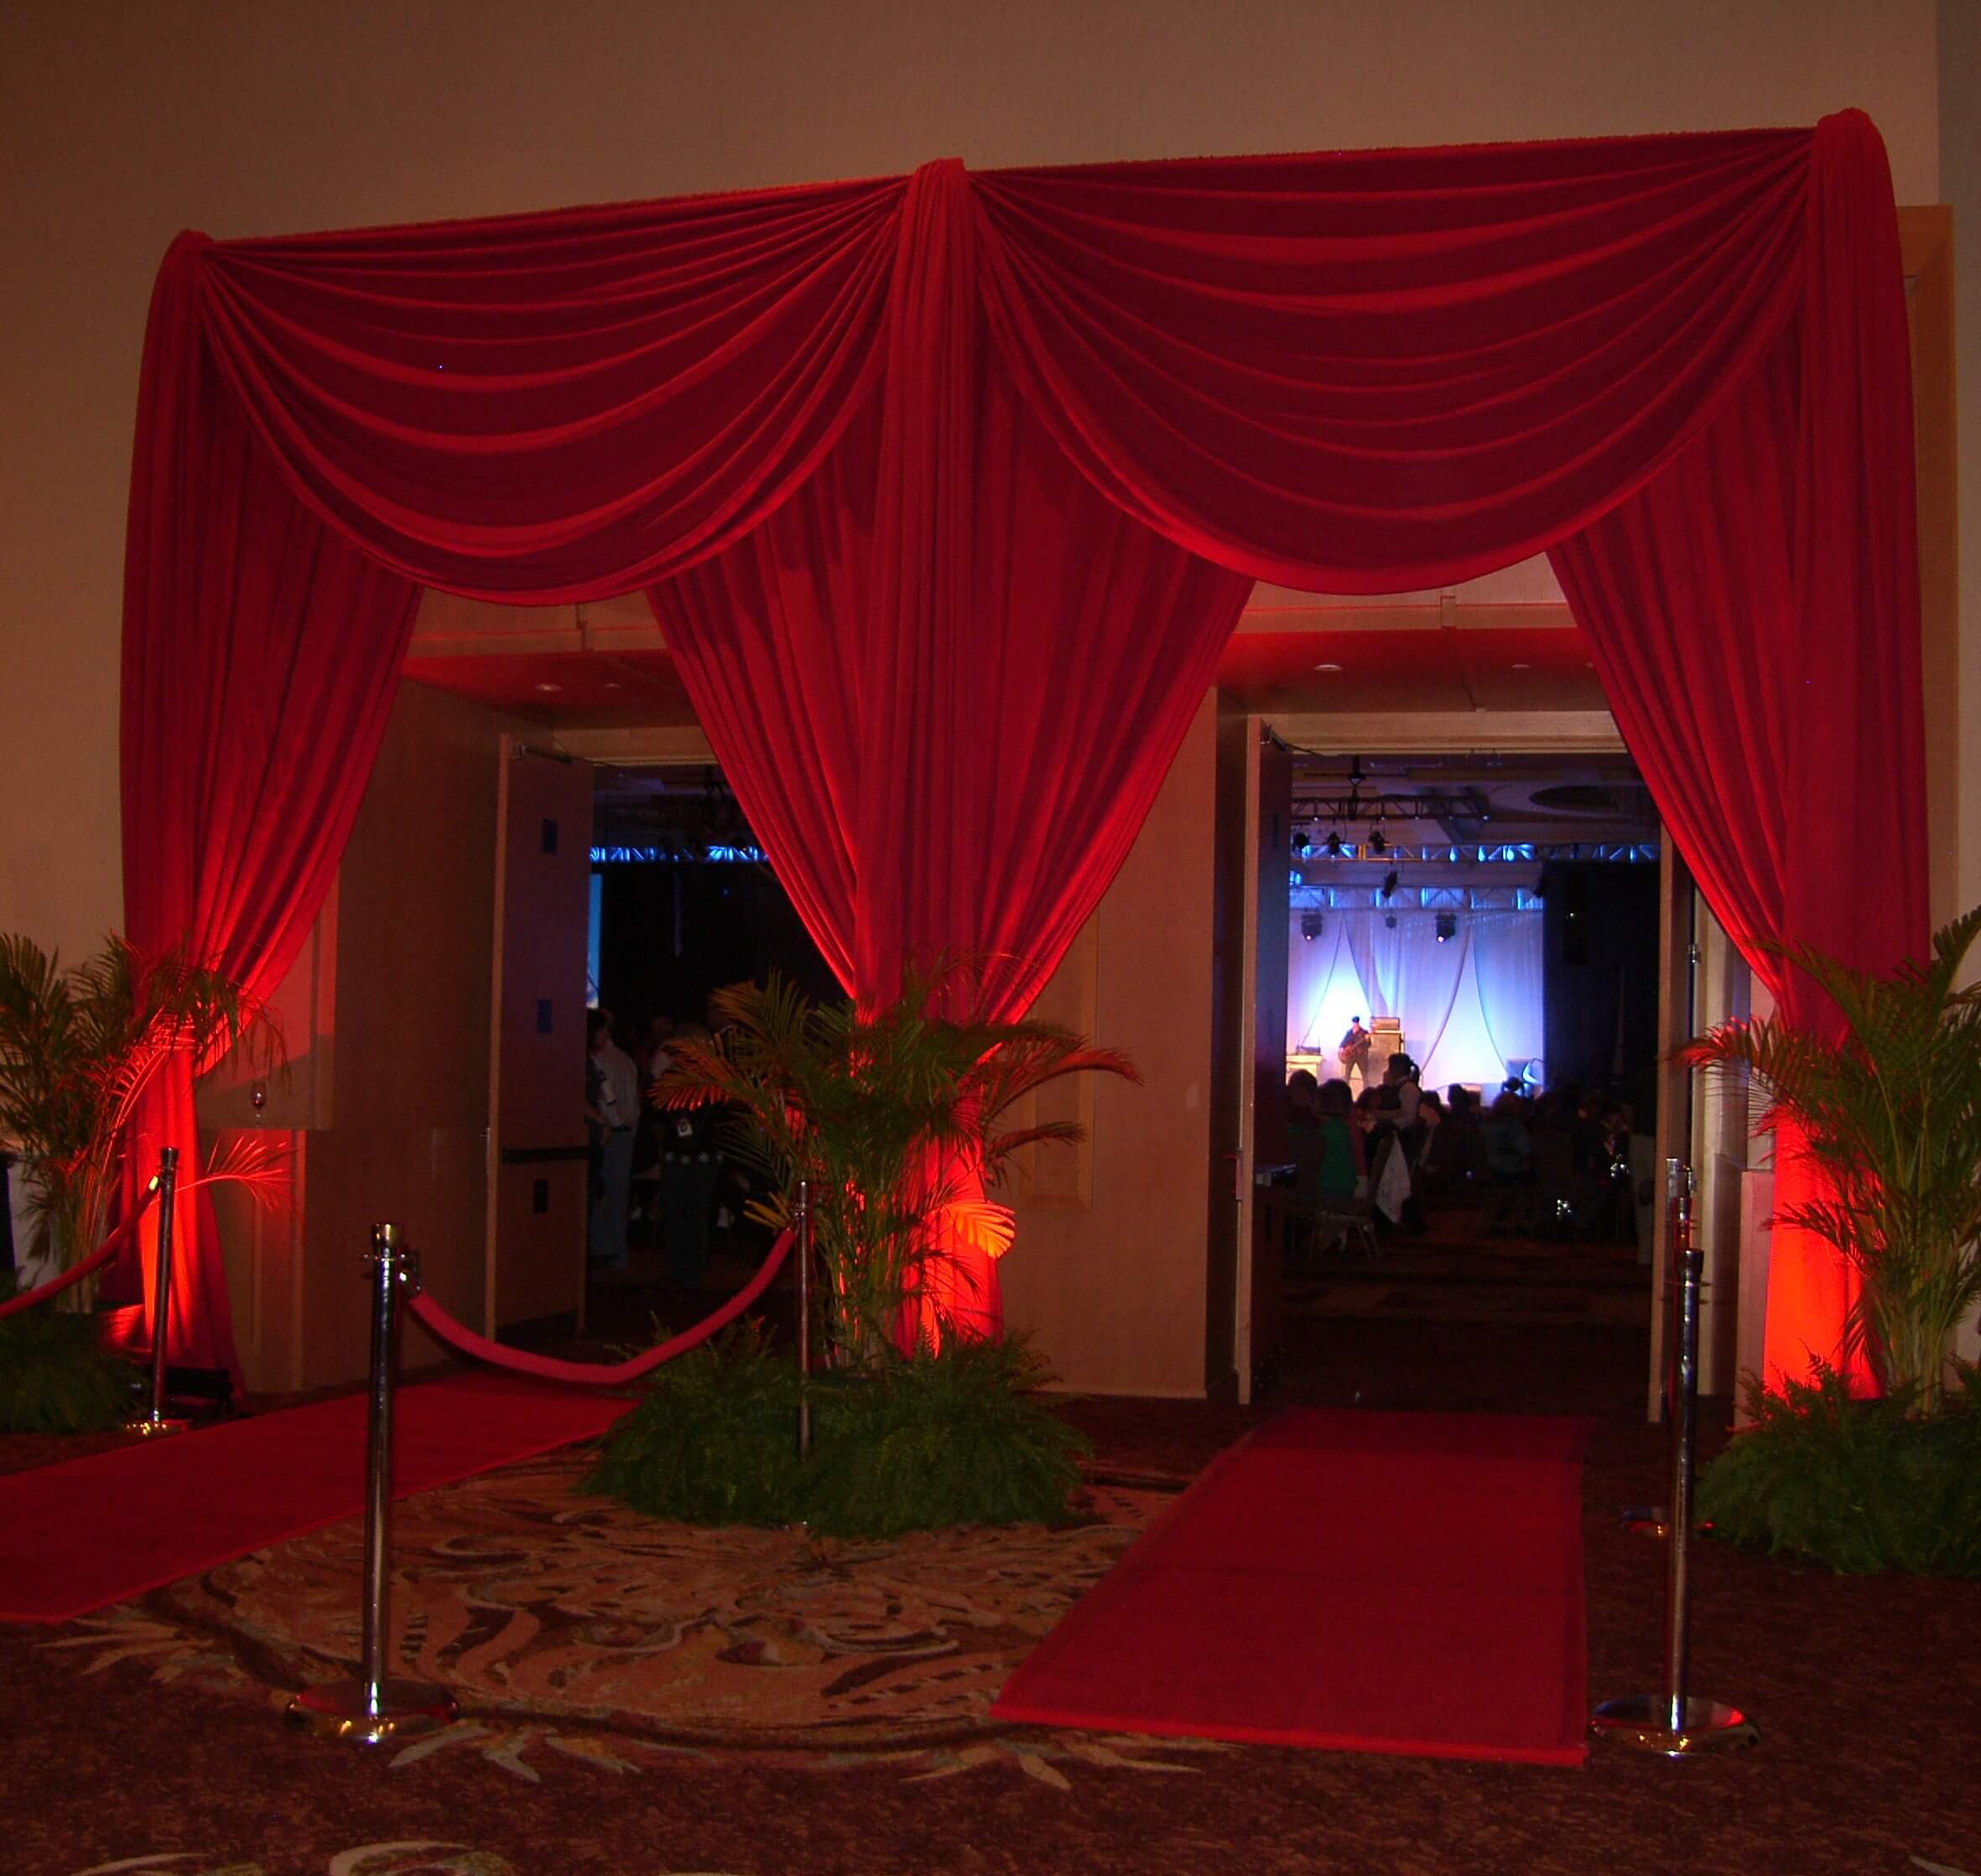 The Grand Entrance Themed Event